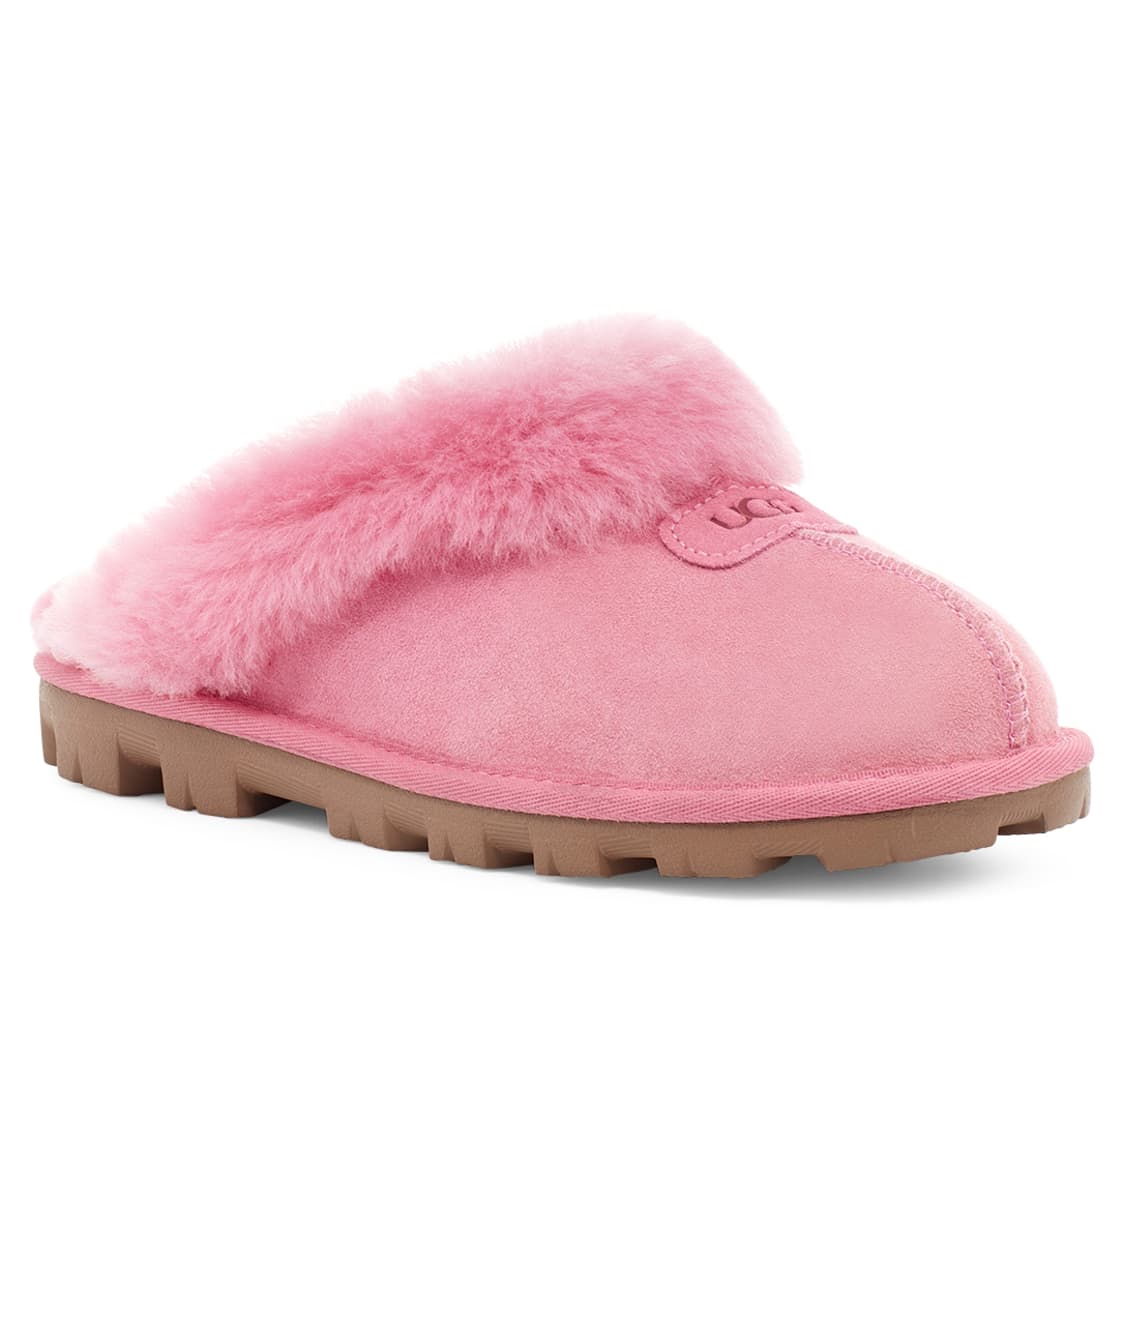 UGG Coquette Slippers & Reviews | Bare Necessities (Style 5125)